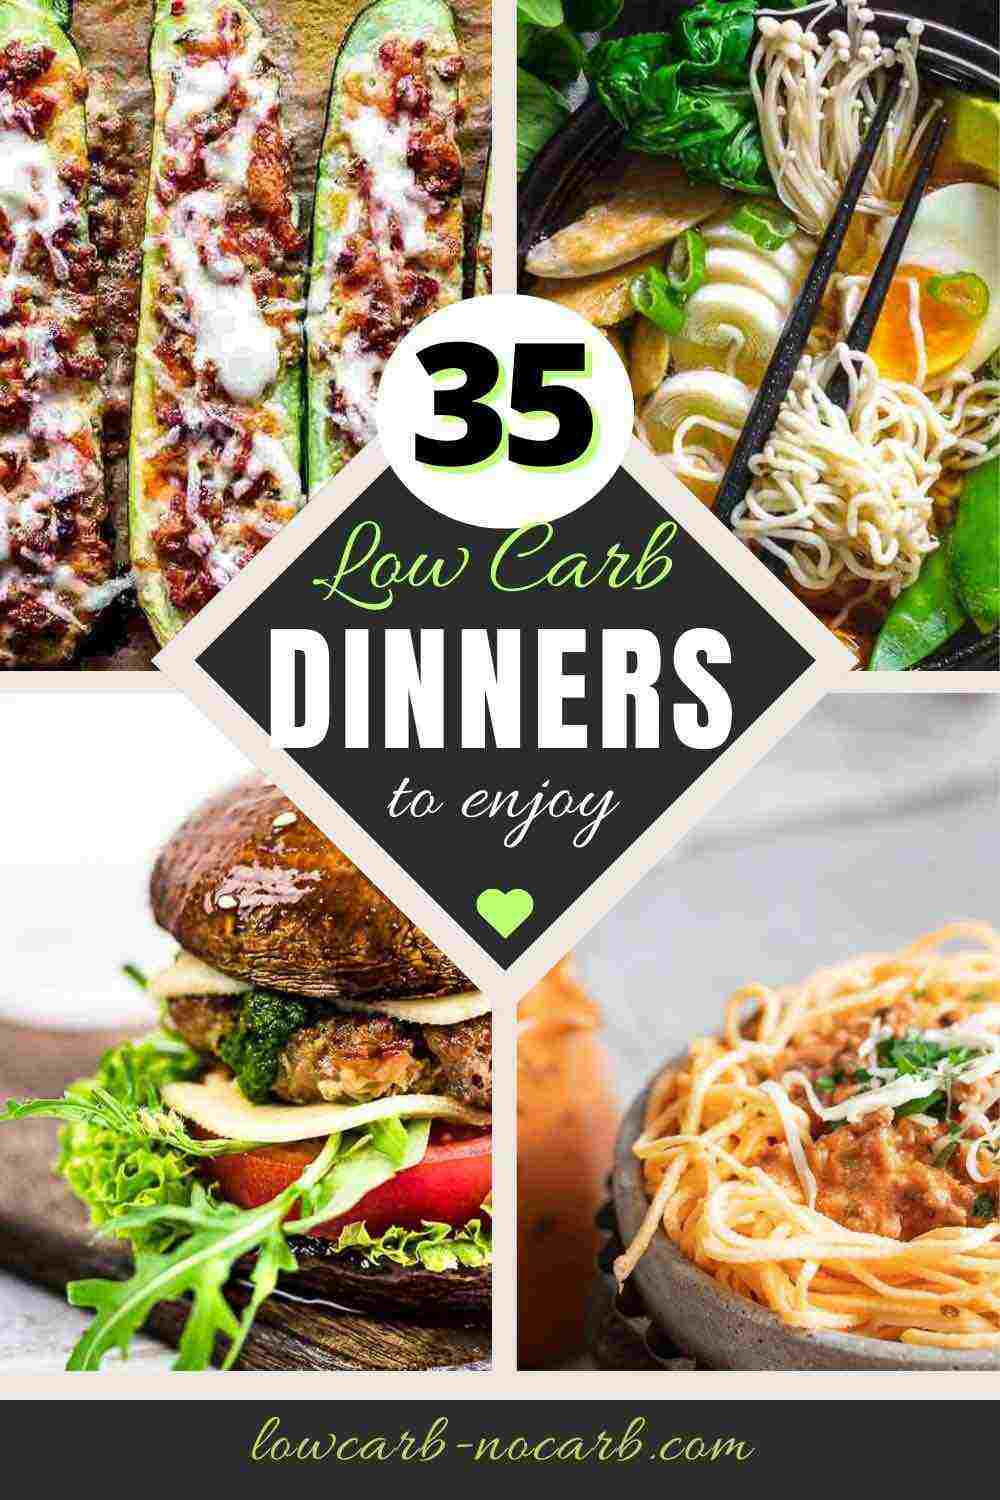 35 low carb dinners to enjoy.